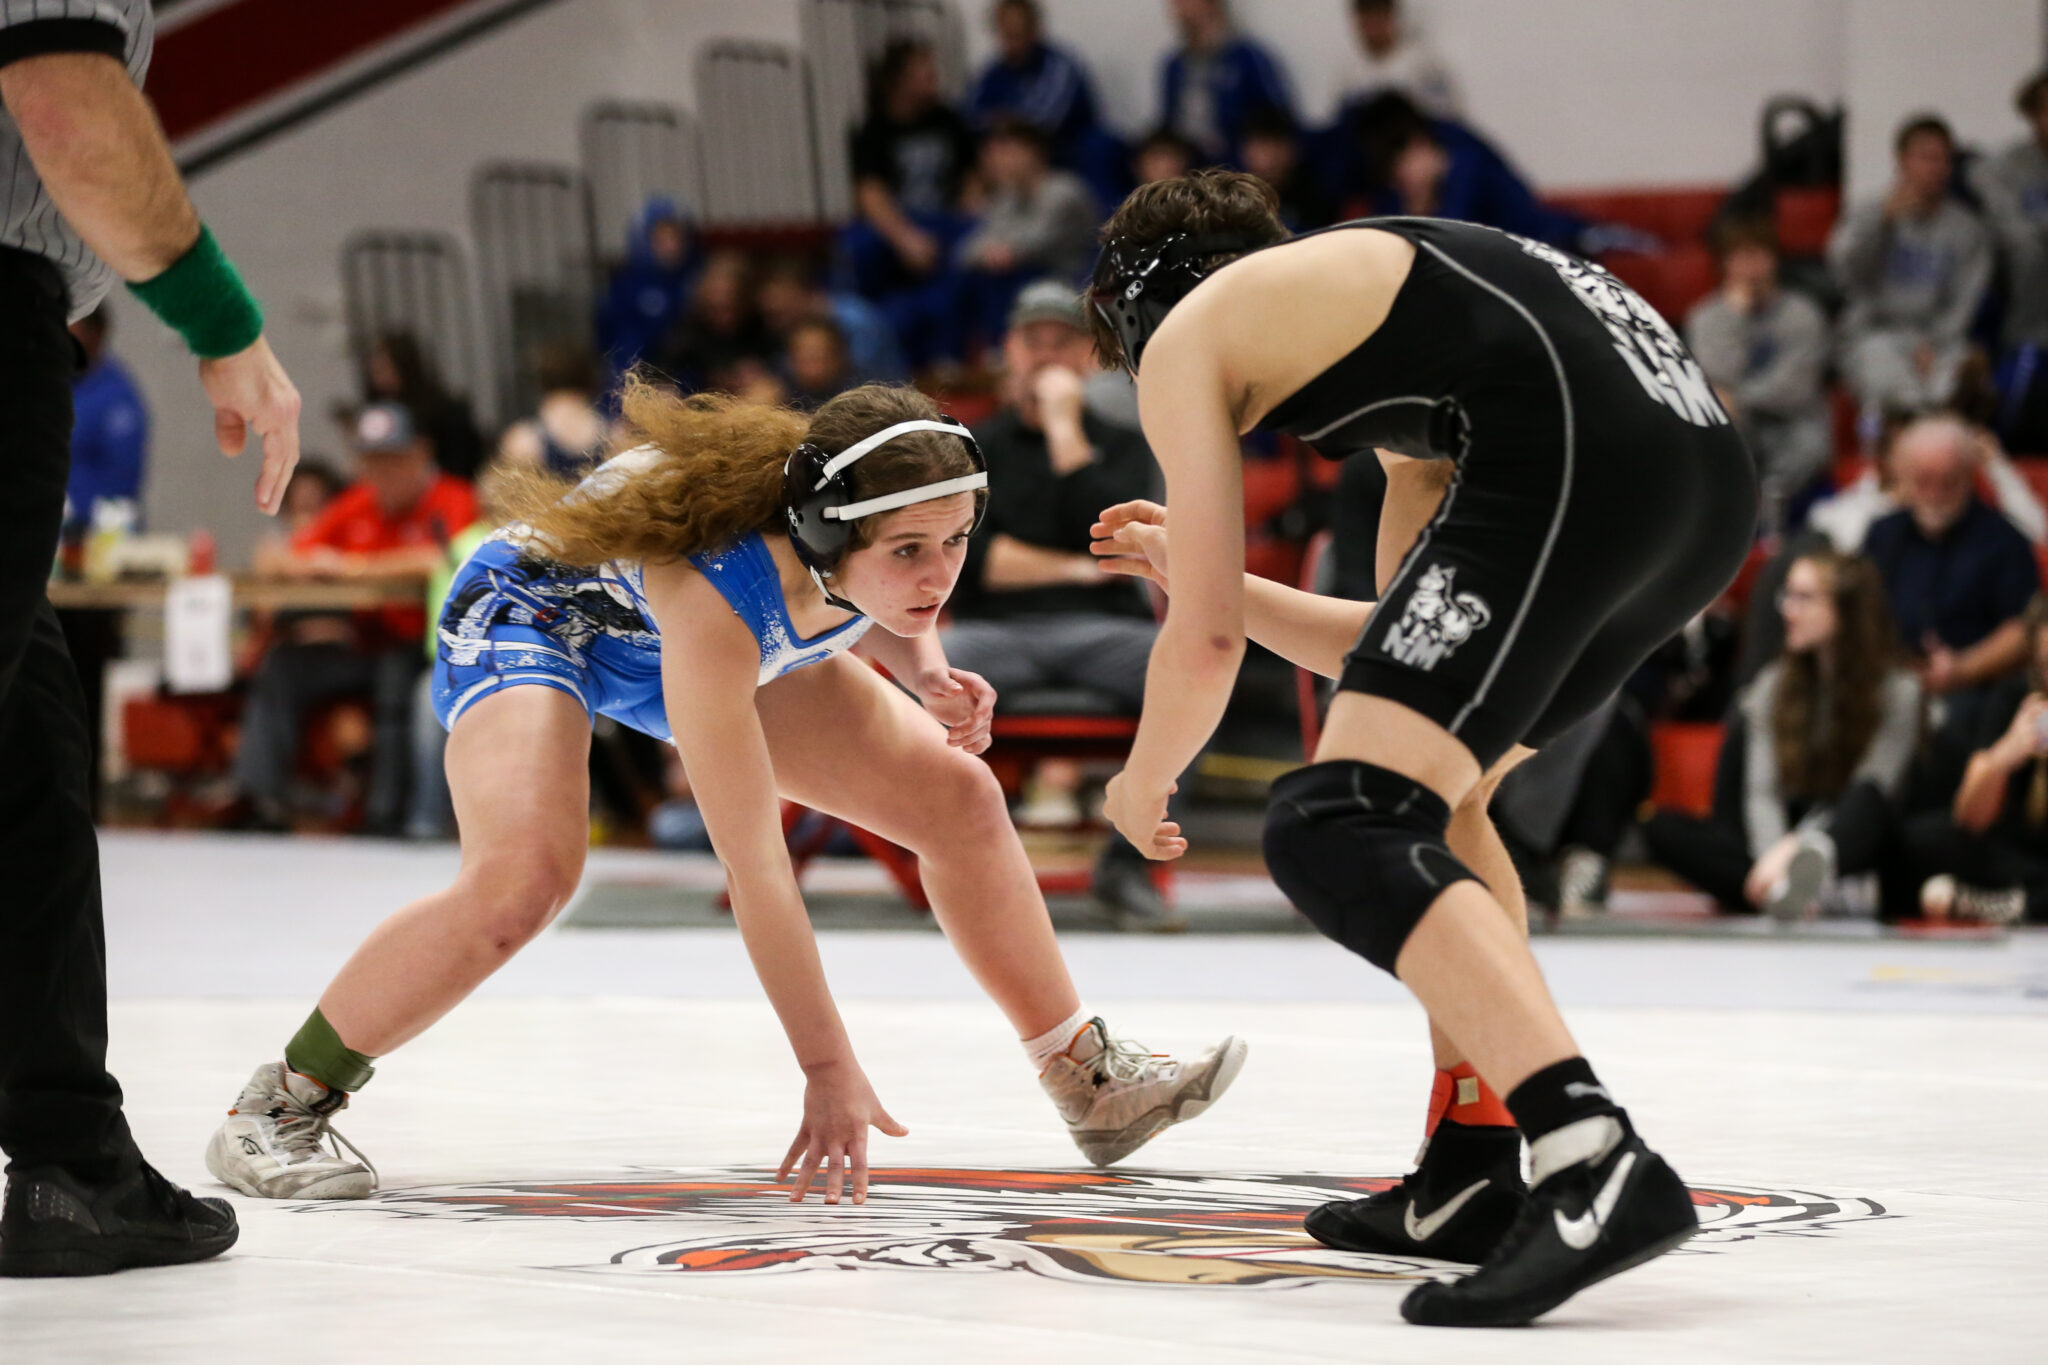 Girls to have own division at State Wrestling Tournament starting in